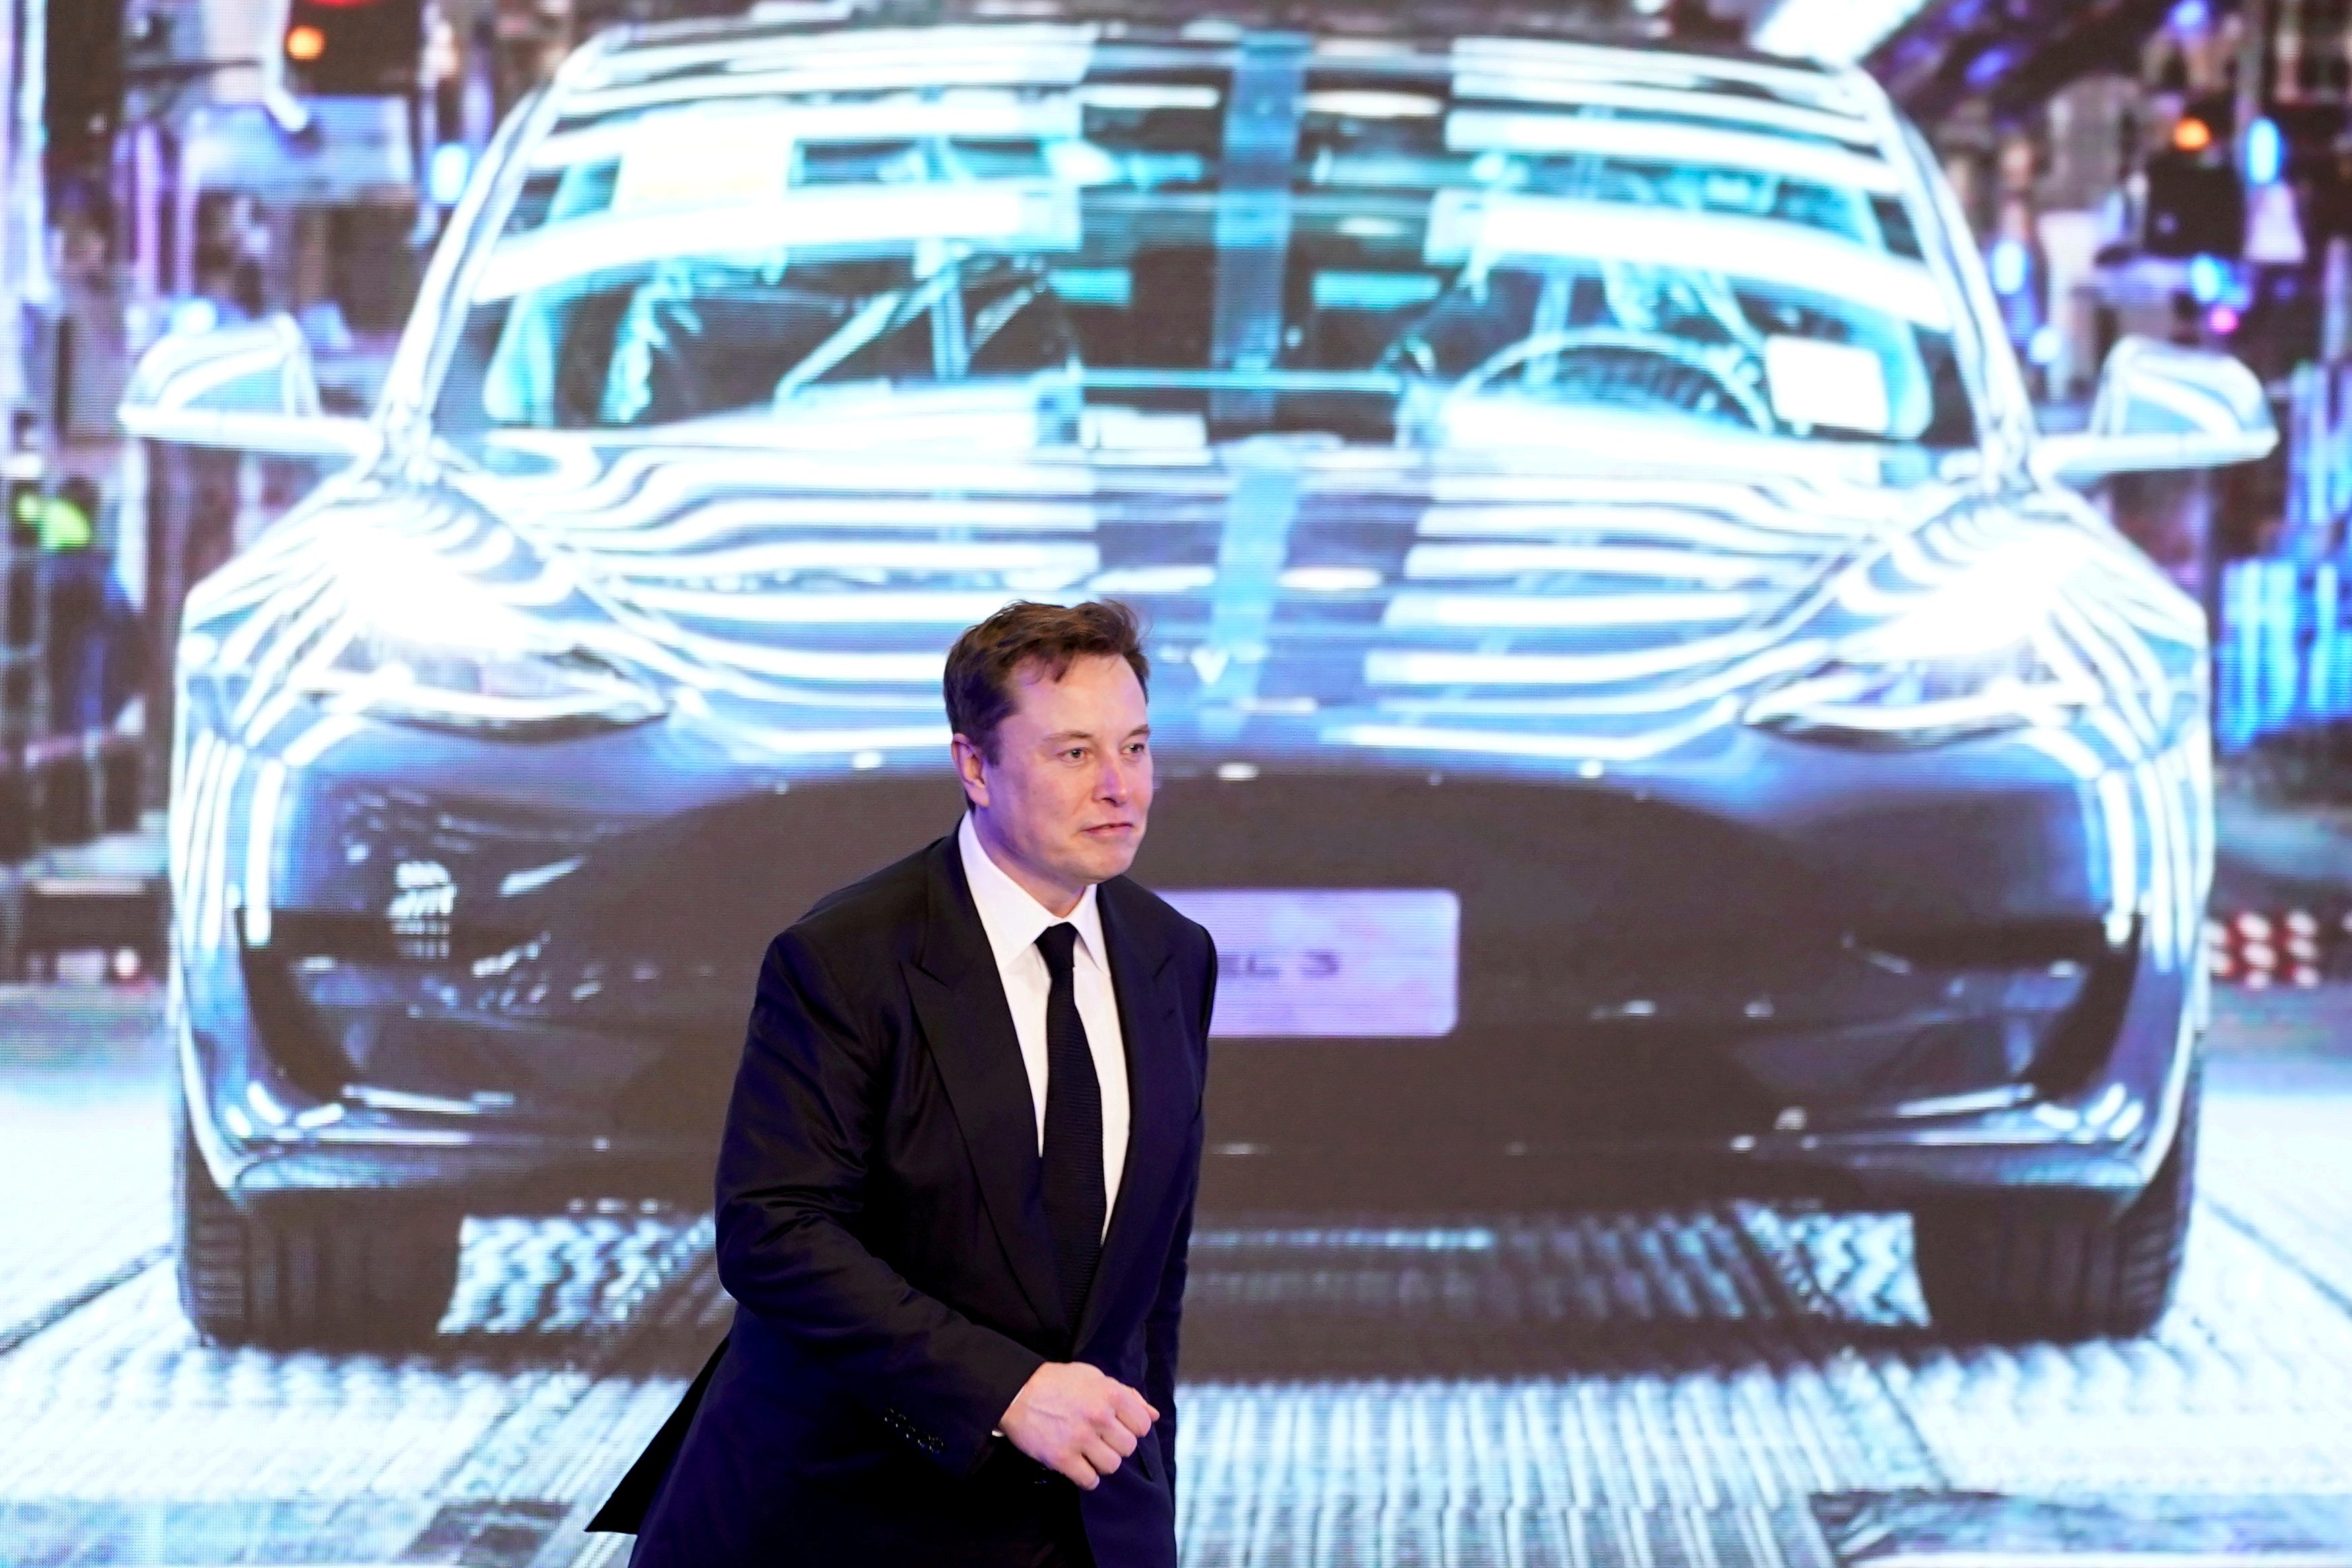 Tesla will ‘most likely’ restart accepting bitcoin as payments, says Musk